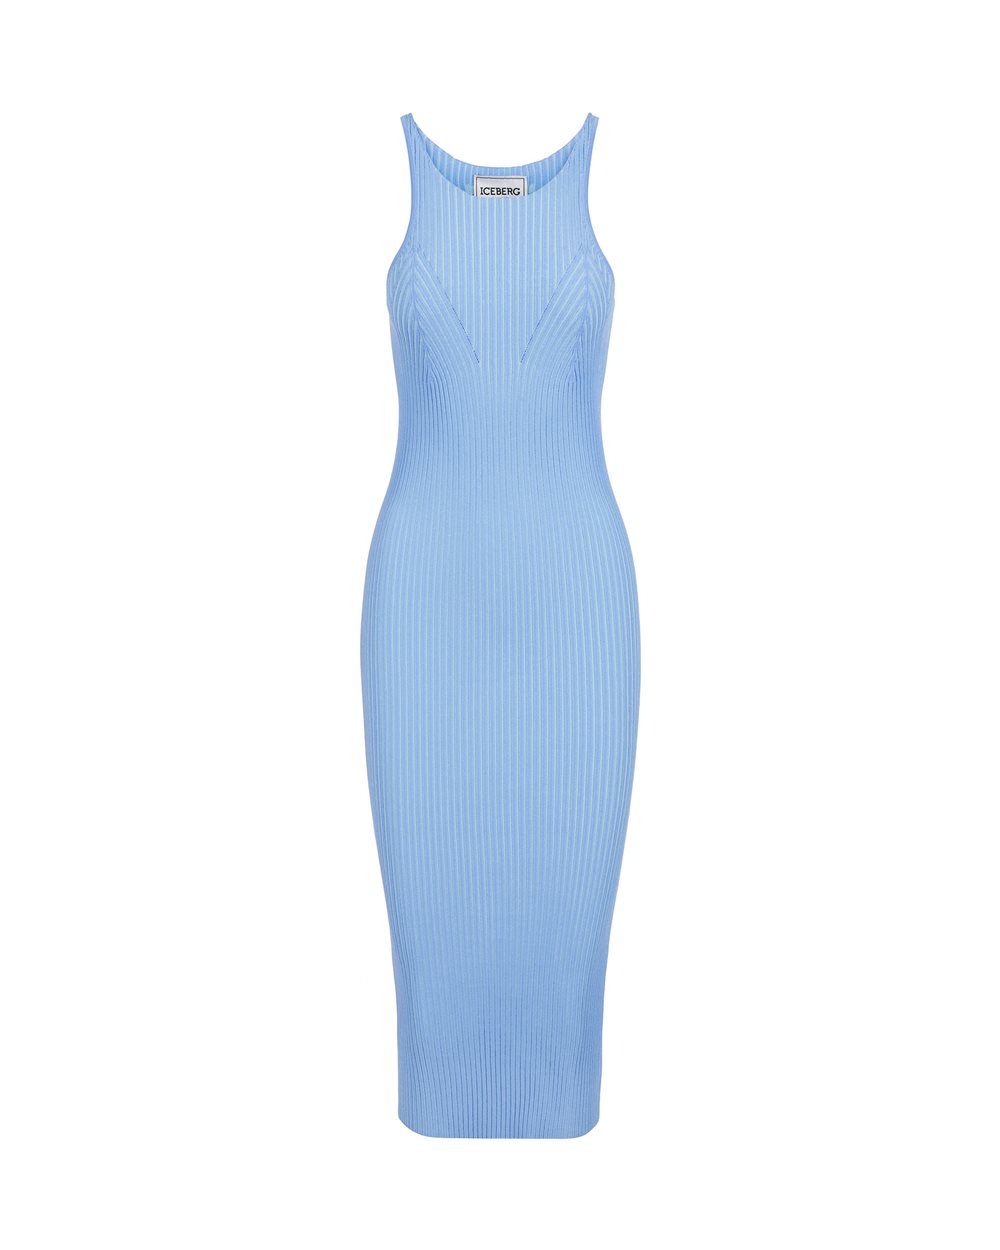 Sheath dress with logo - New in | Iceberg - Official Website